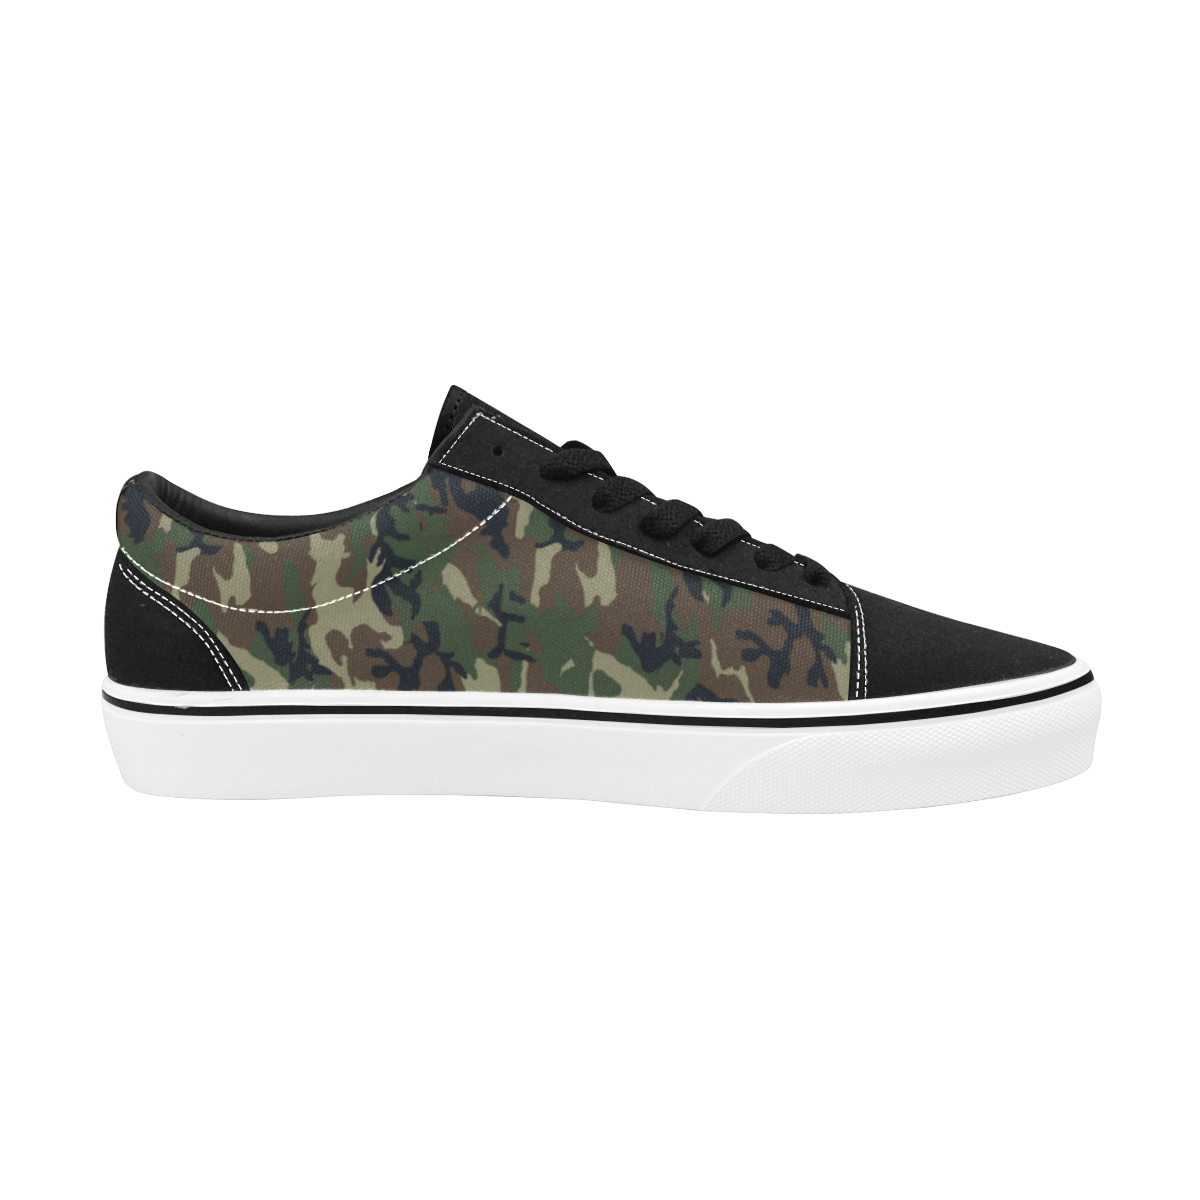 Woodland Forest Green Camouflage Women's Low Top Skateboarding Shoes/Large (Model E001-2)